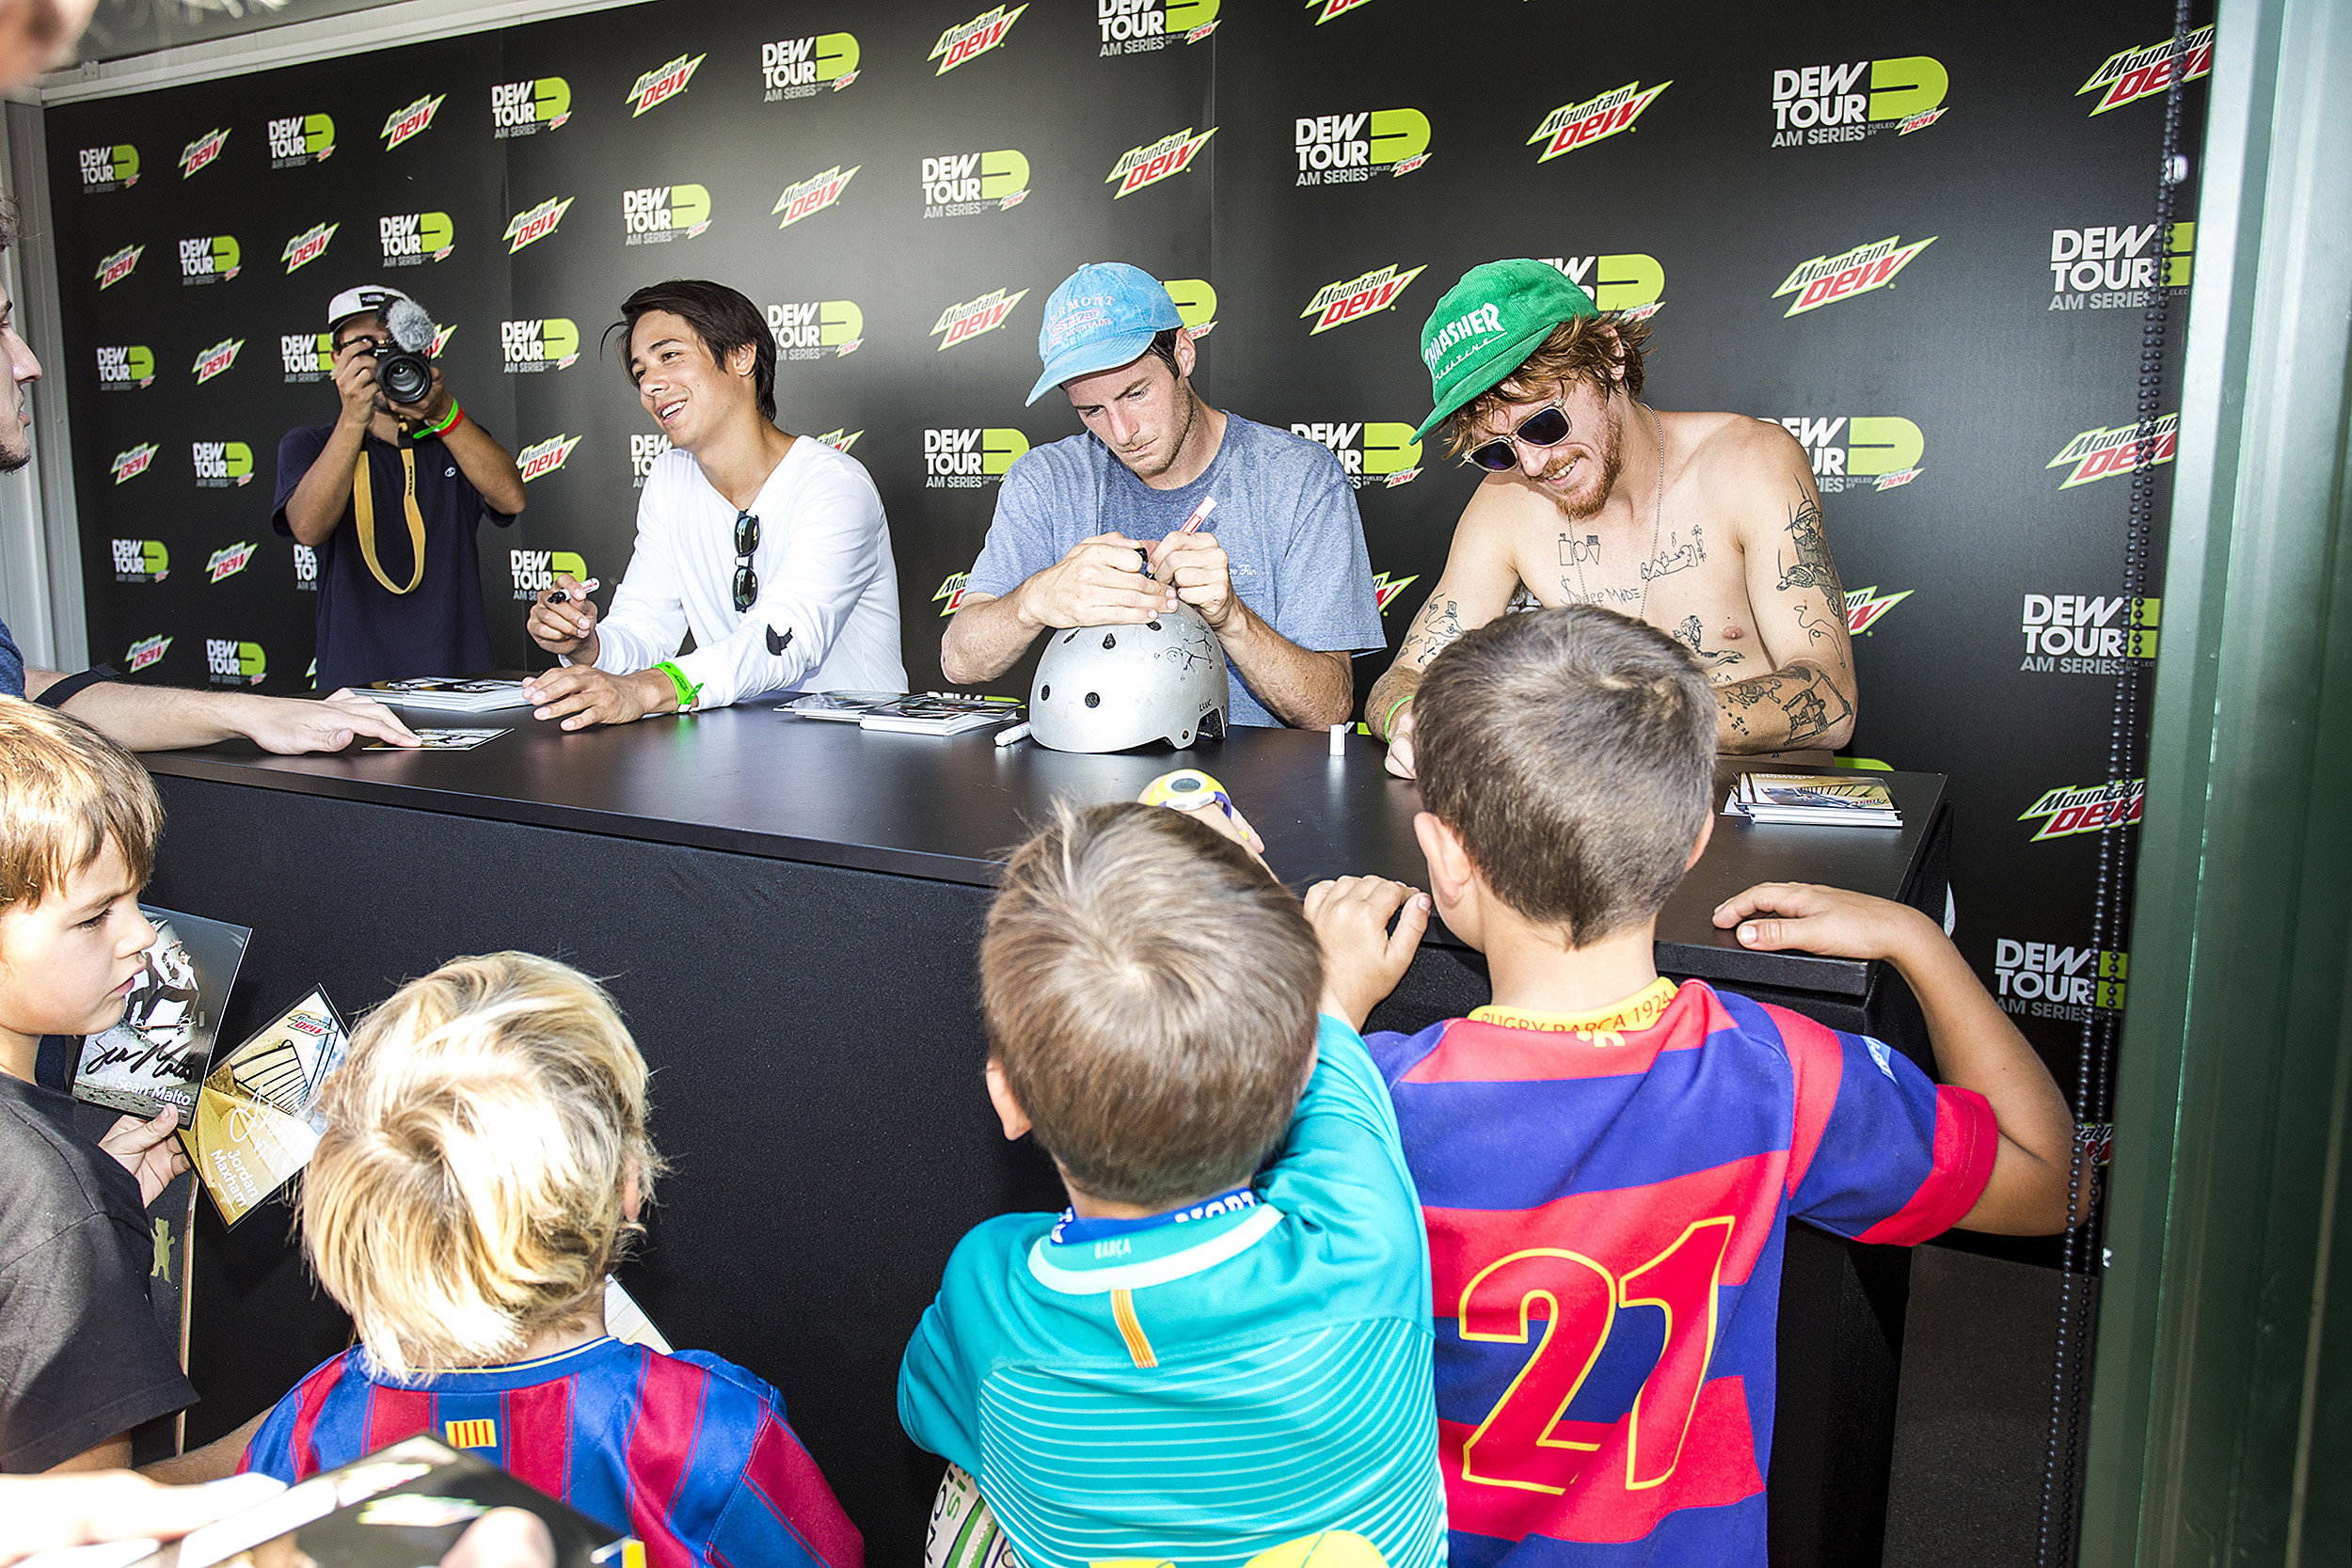 Mnt_dew_team_signing_am_search_barcelona_ortiz_19